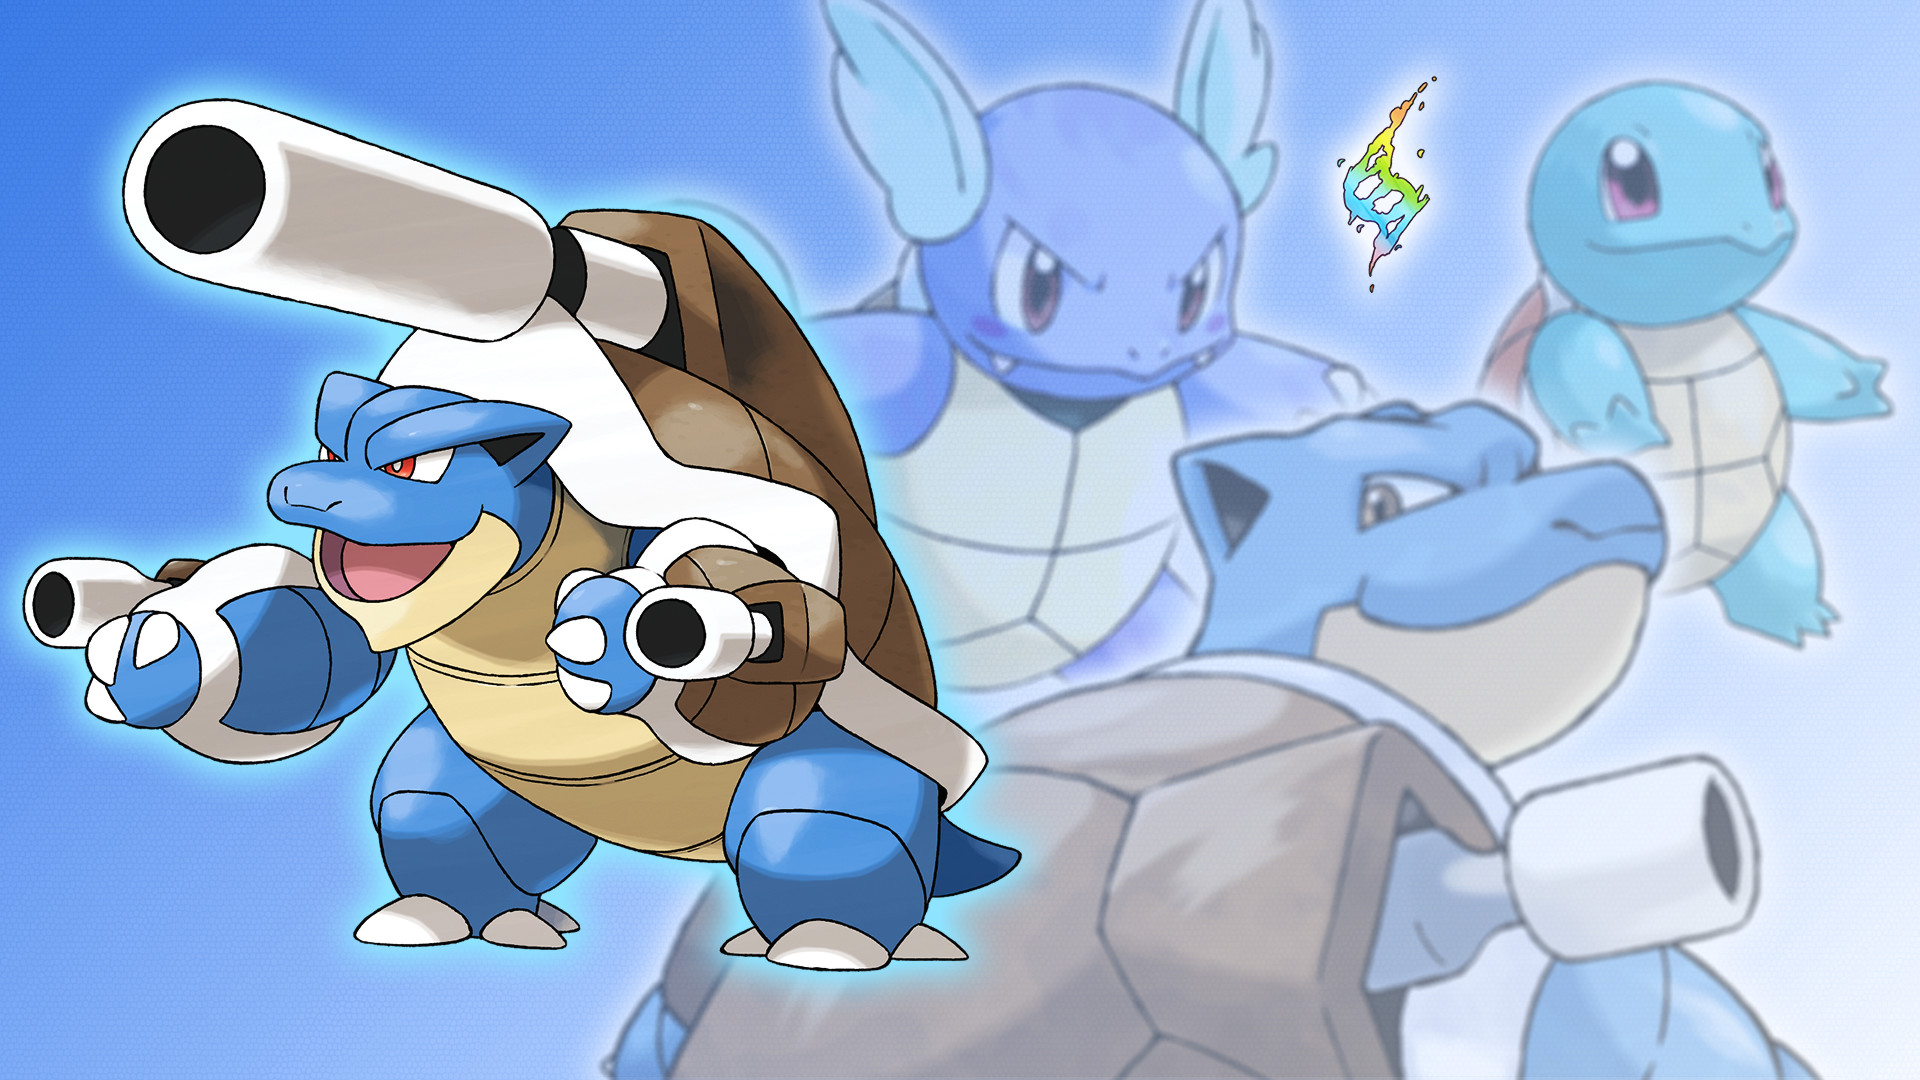 1920x1080 Toumatoo 119 9 Squirtle, Wartortle, Blastoise and Mega Wallpaper by Glench